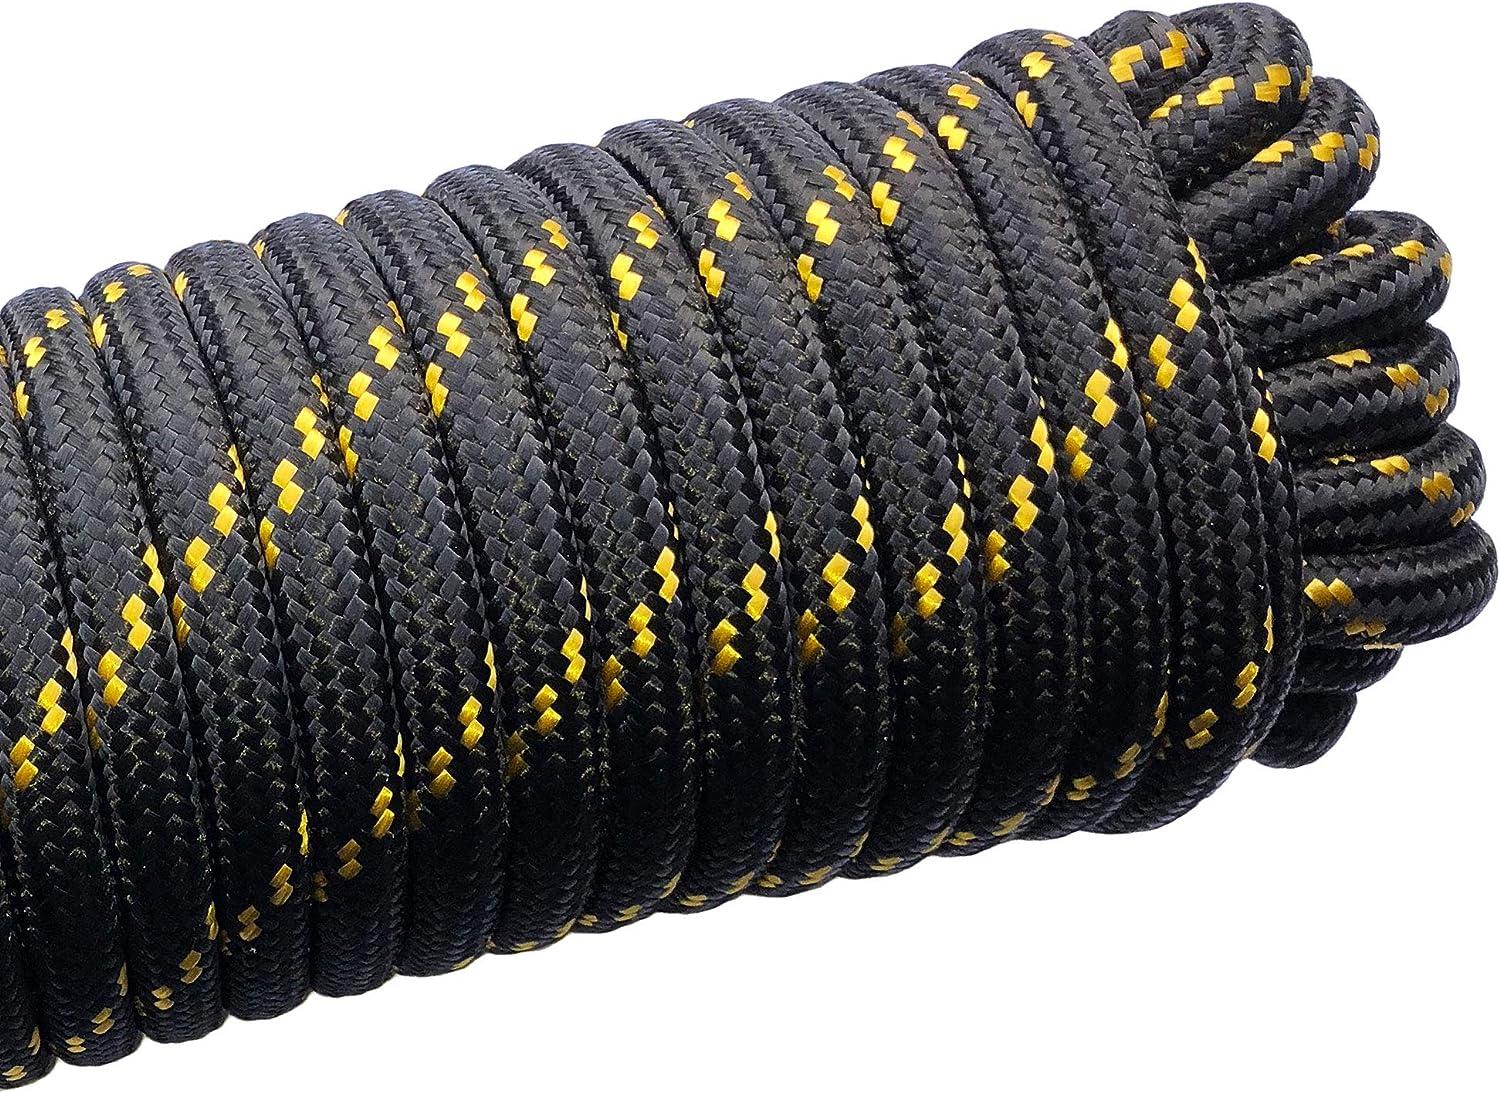 Typhon East Polypropylene Braided Nylon Rope - Heavy Duty Paracord Rope -  High Strength Utility Cord for Flag Pole - Camping Rope (100 Feet Long)